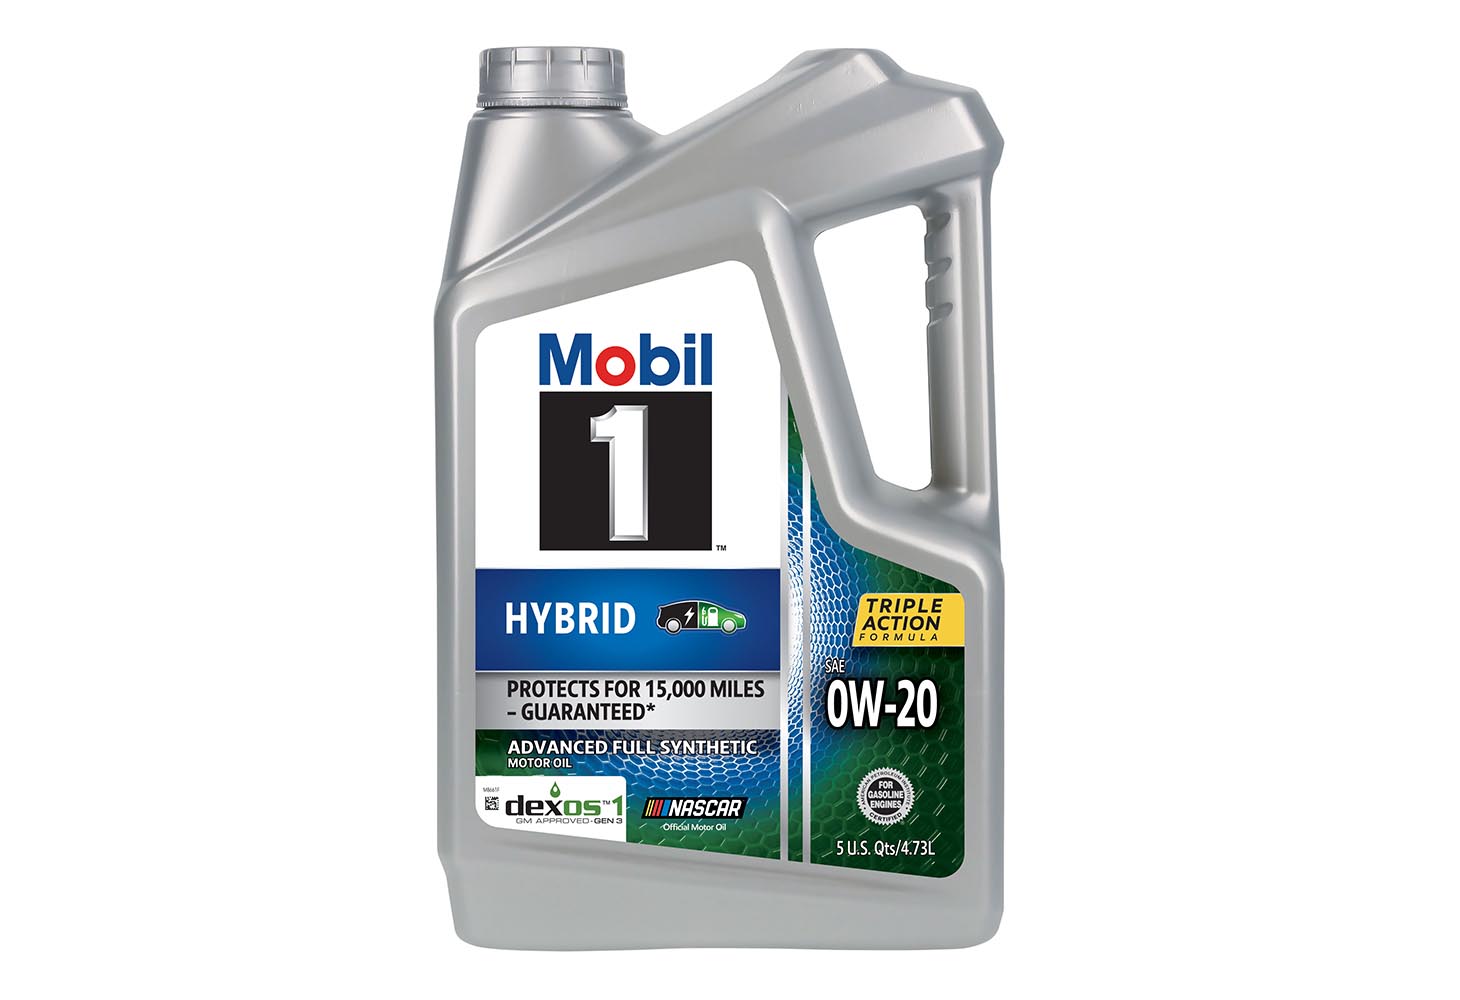 Mobil 1 announces launch of low-viscosity oil for hybrid engines